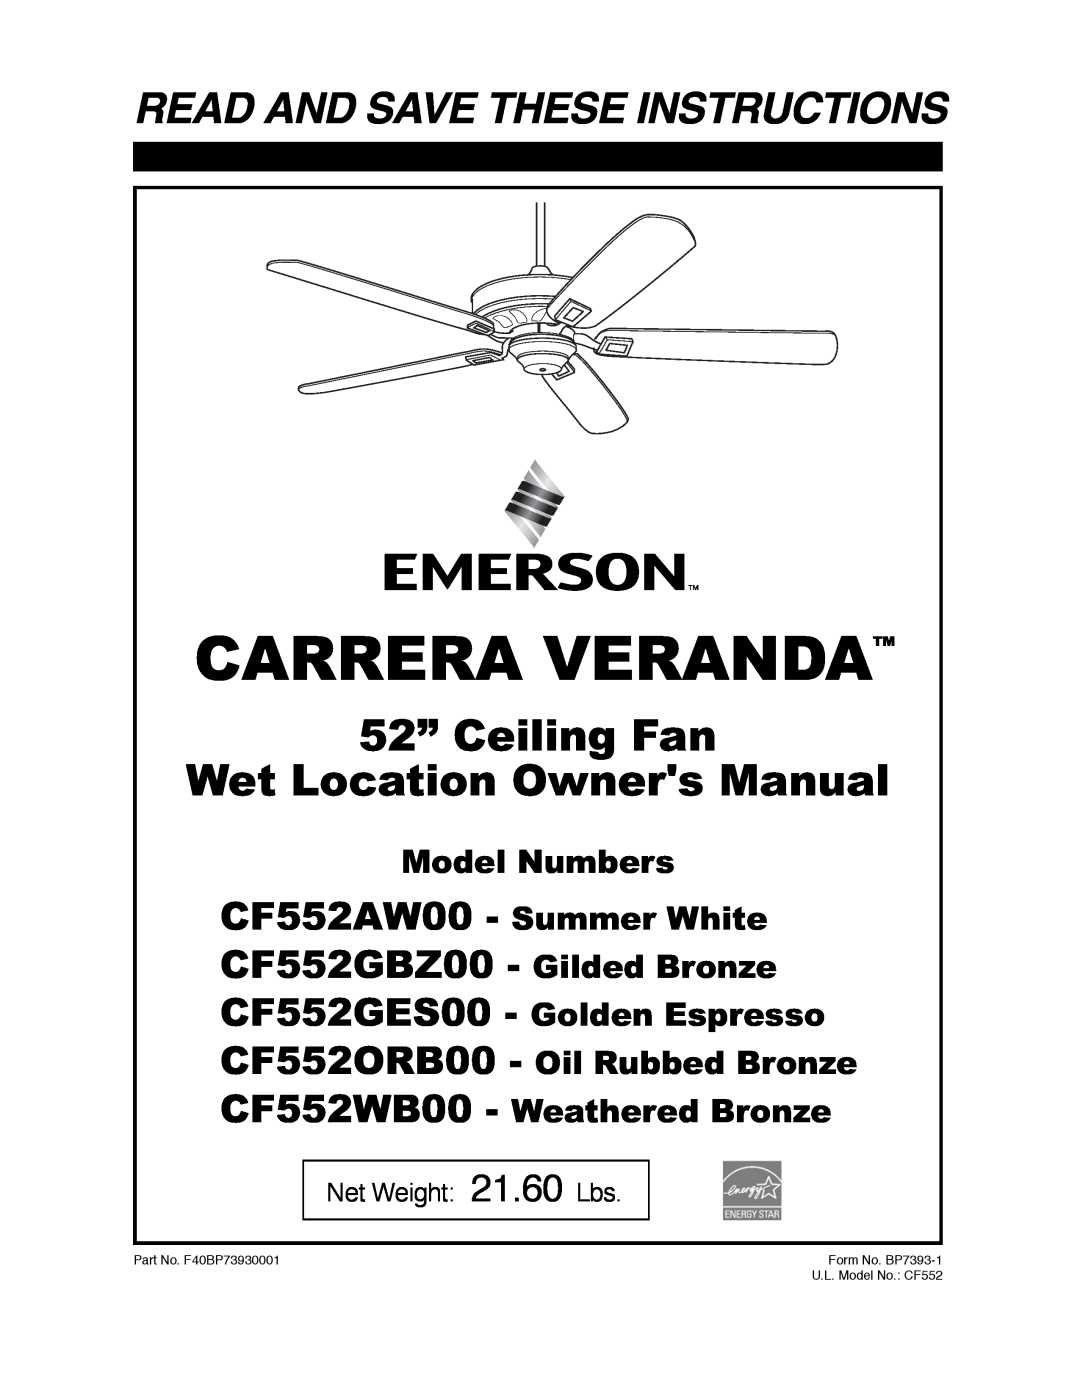 Emerson owner manual Carrera Veranda, Read And Save These Instructions, CF552AW00 - Summer White, Model Numbers 